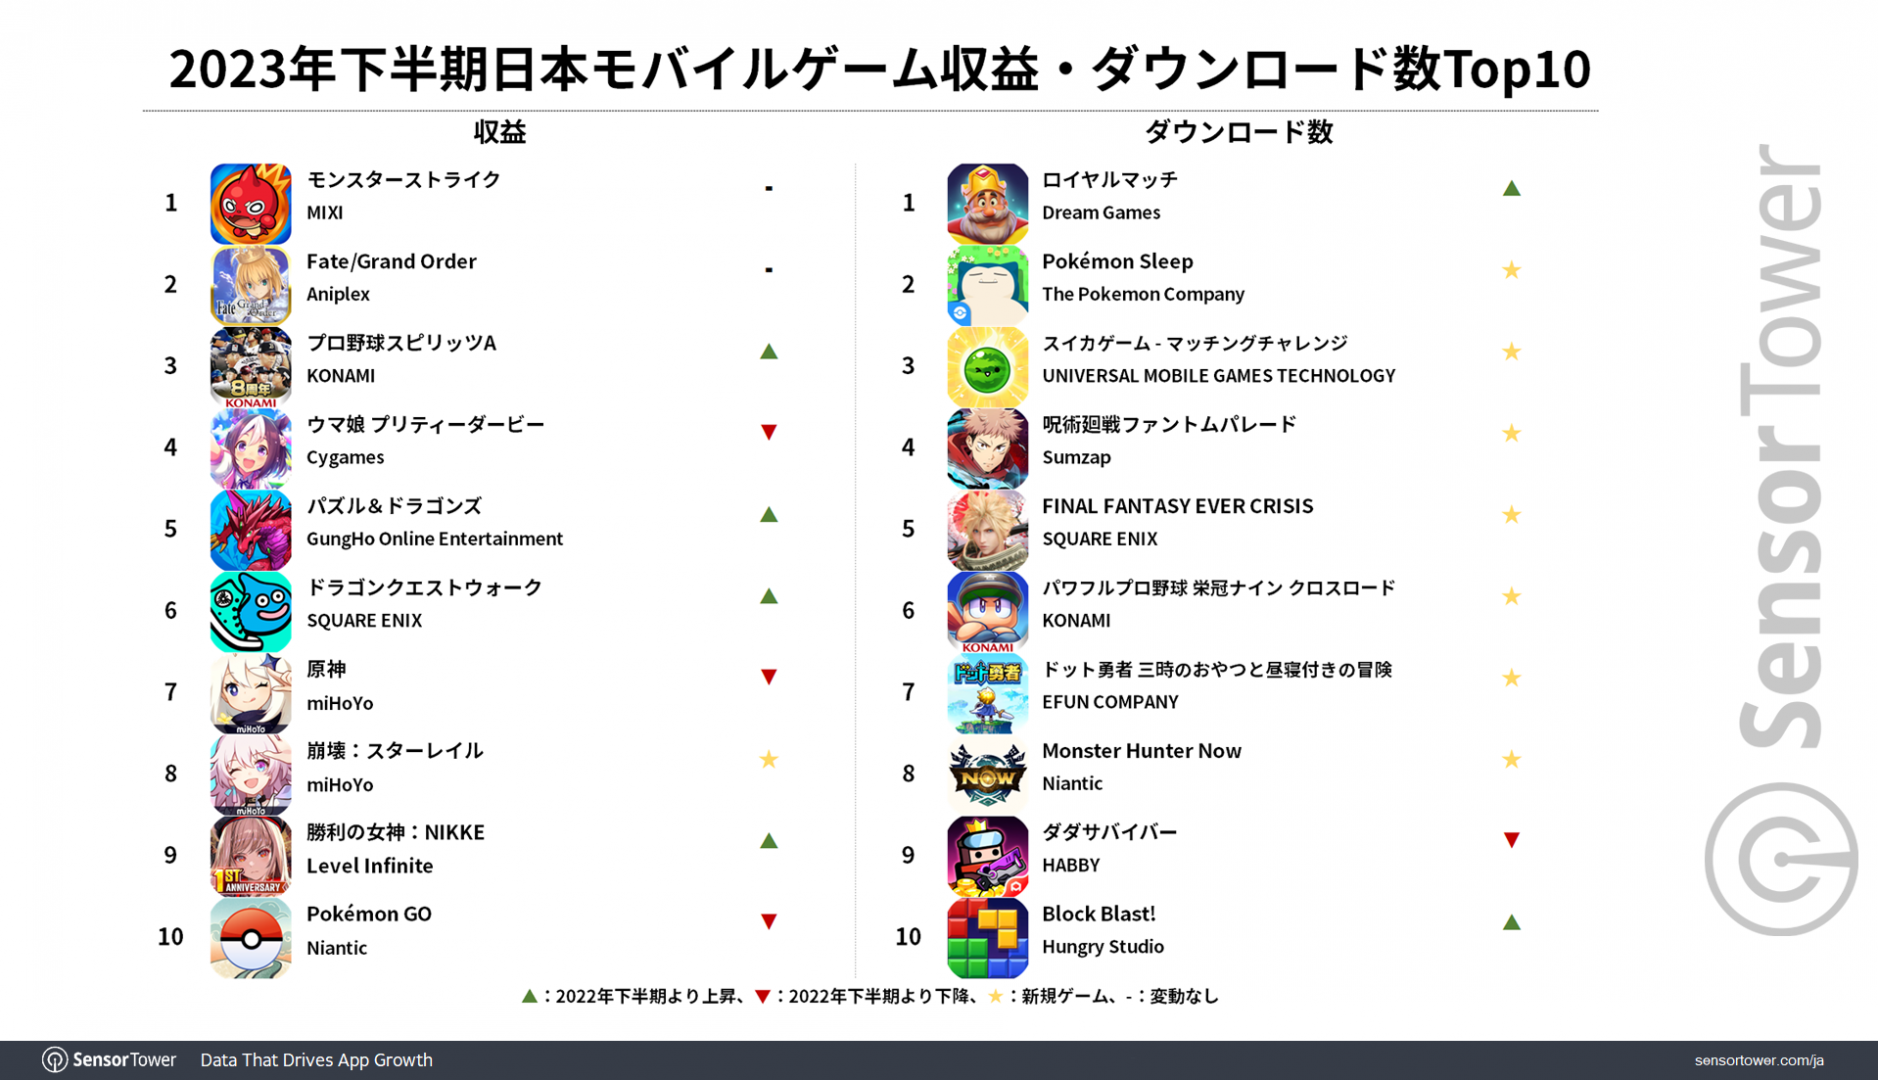 Japan mobile games profit and download numbers top 10 charts 2023